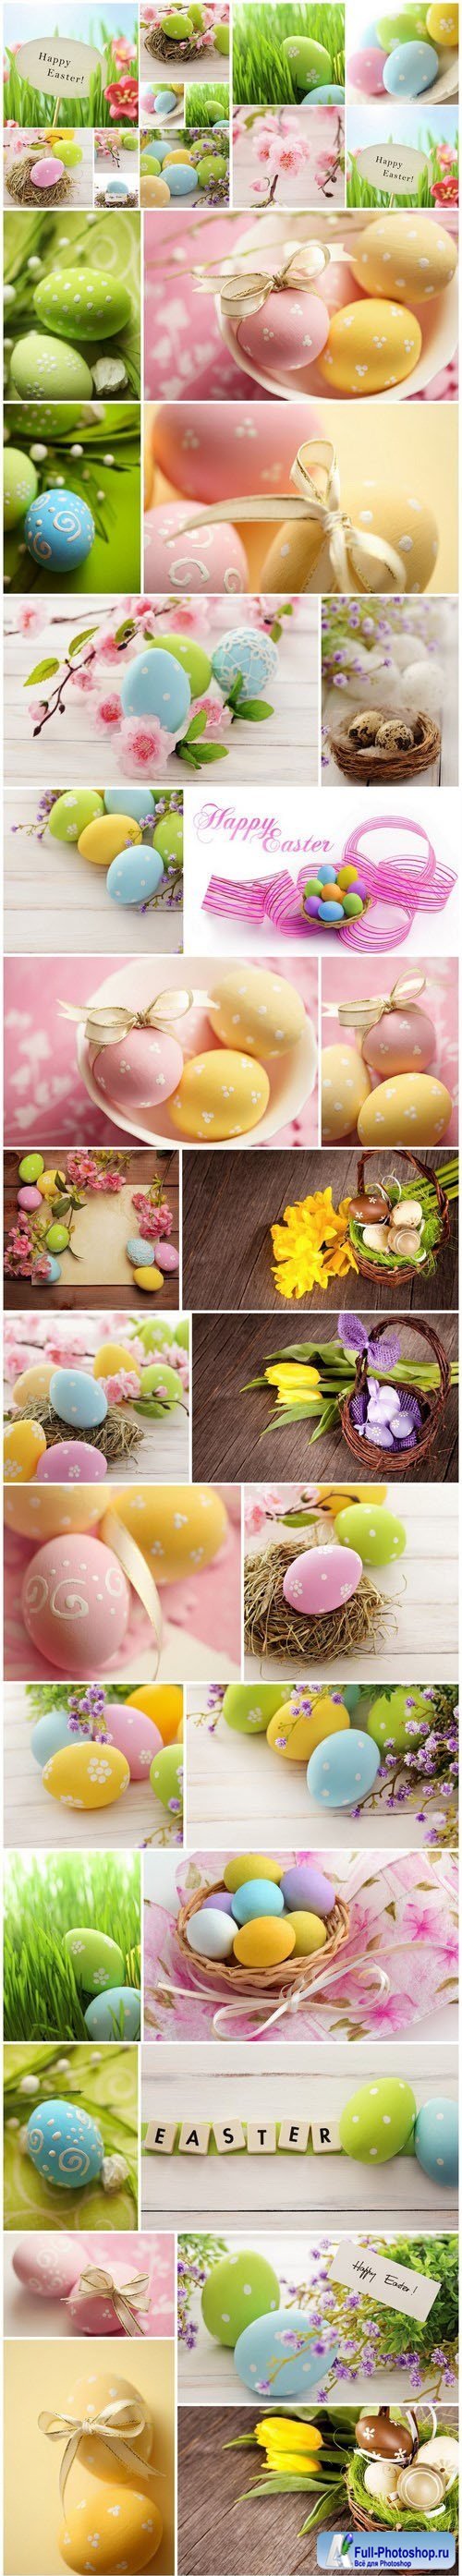 Easter Eggs and Happy Easter 3 - Set of 30xUHQ JPEG Professional Stock Images